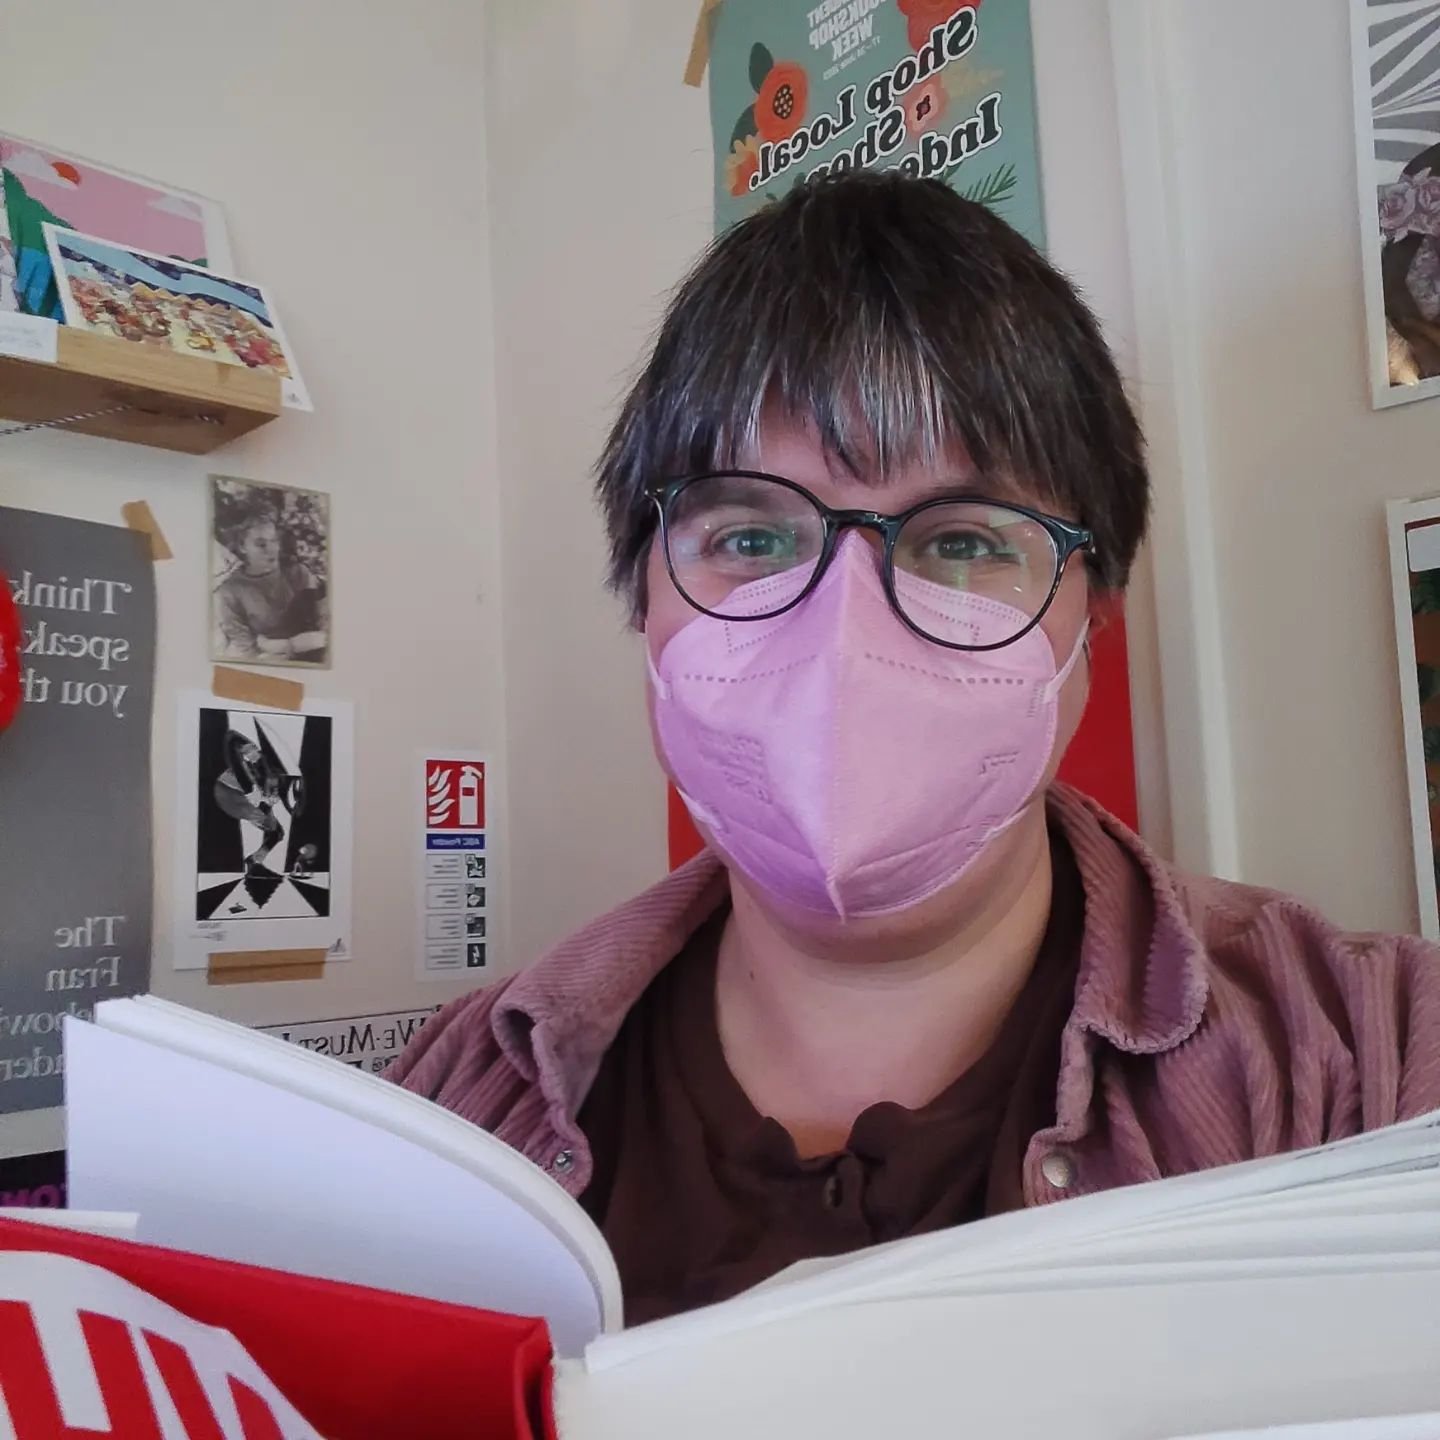 What quiet/masked hour looks like.

Staff in FFP2 masks, door open for ventilation, free masks and sanitiser available, low lighting, no music (though music does drift in from shop down the street), staff reading quietly. We won't talk to you unless 